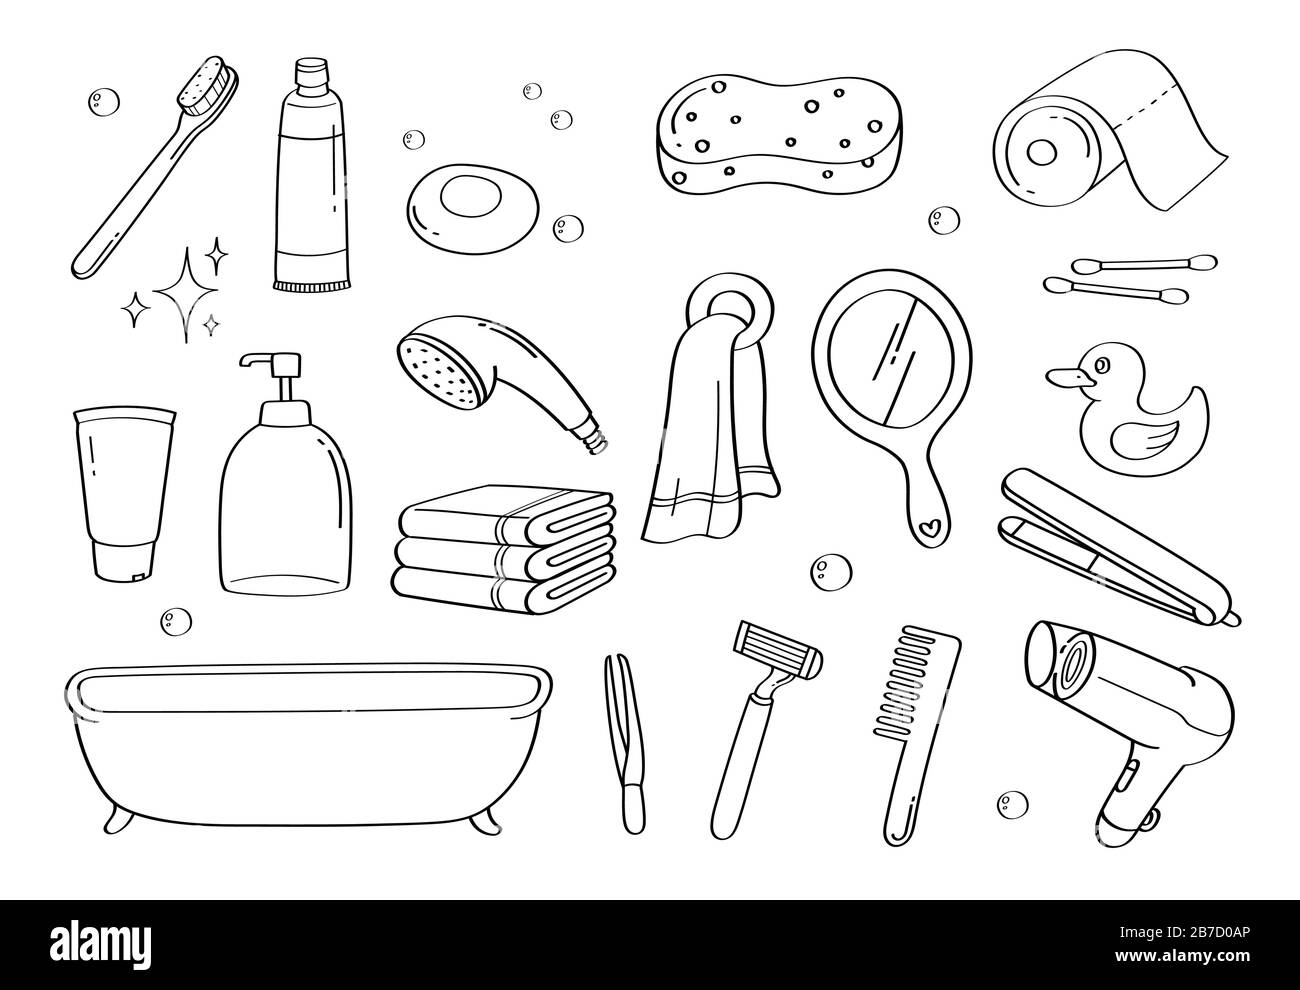 Cute doodle bathroom accessories cartoon icons and objects. Stock Vector